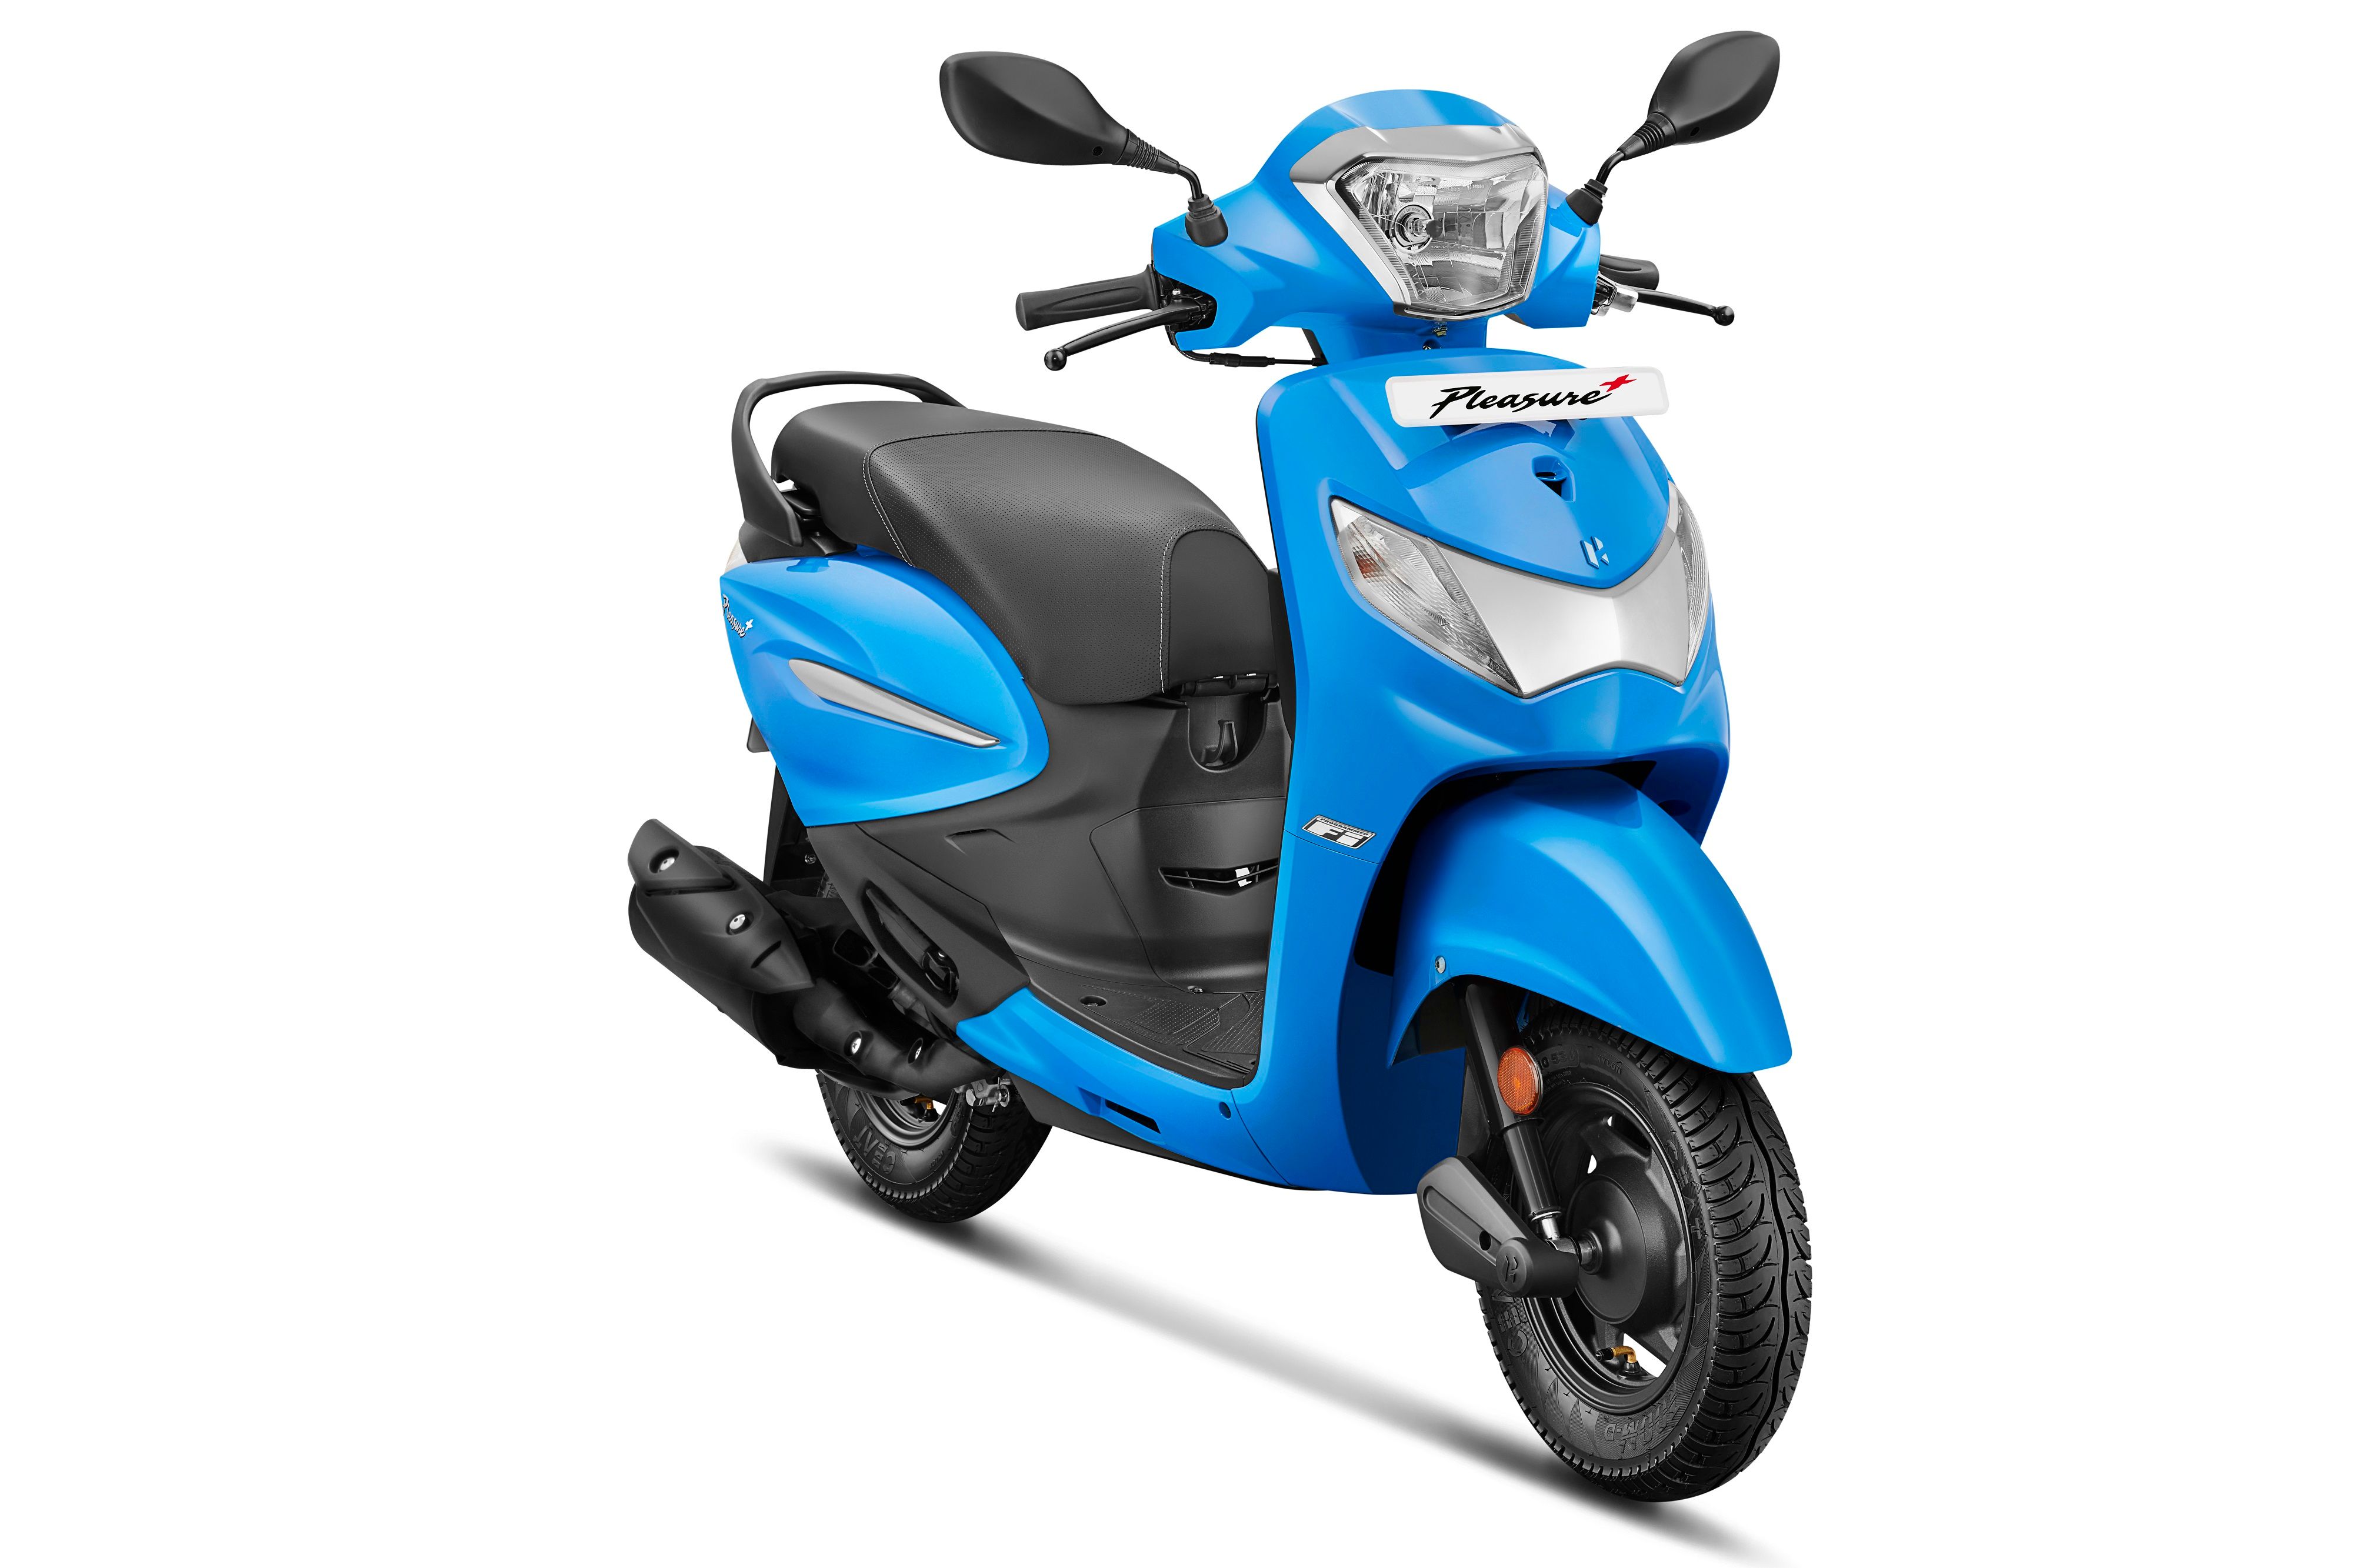 Hero Pleasure Plus 110 BS6 Scooter Launched 